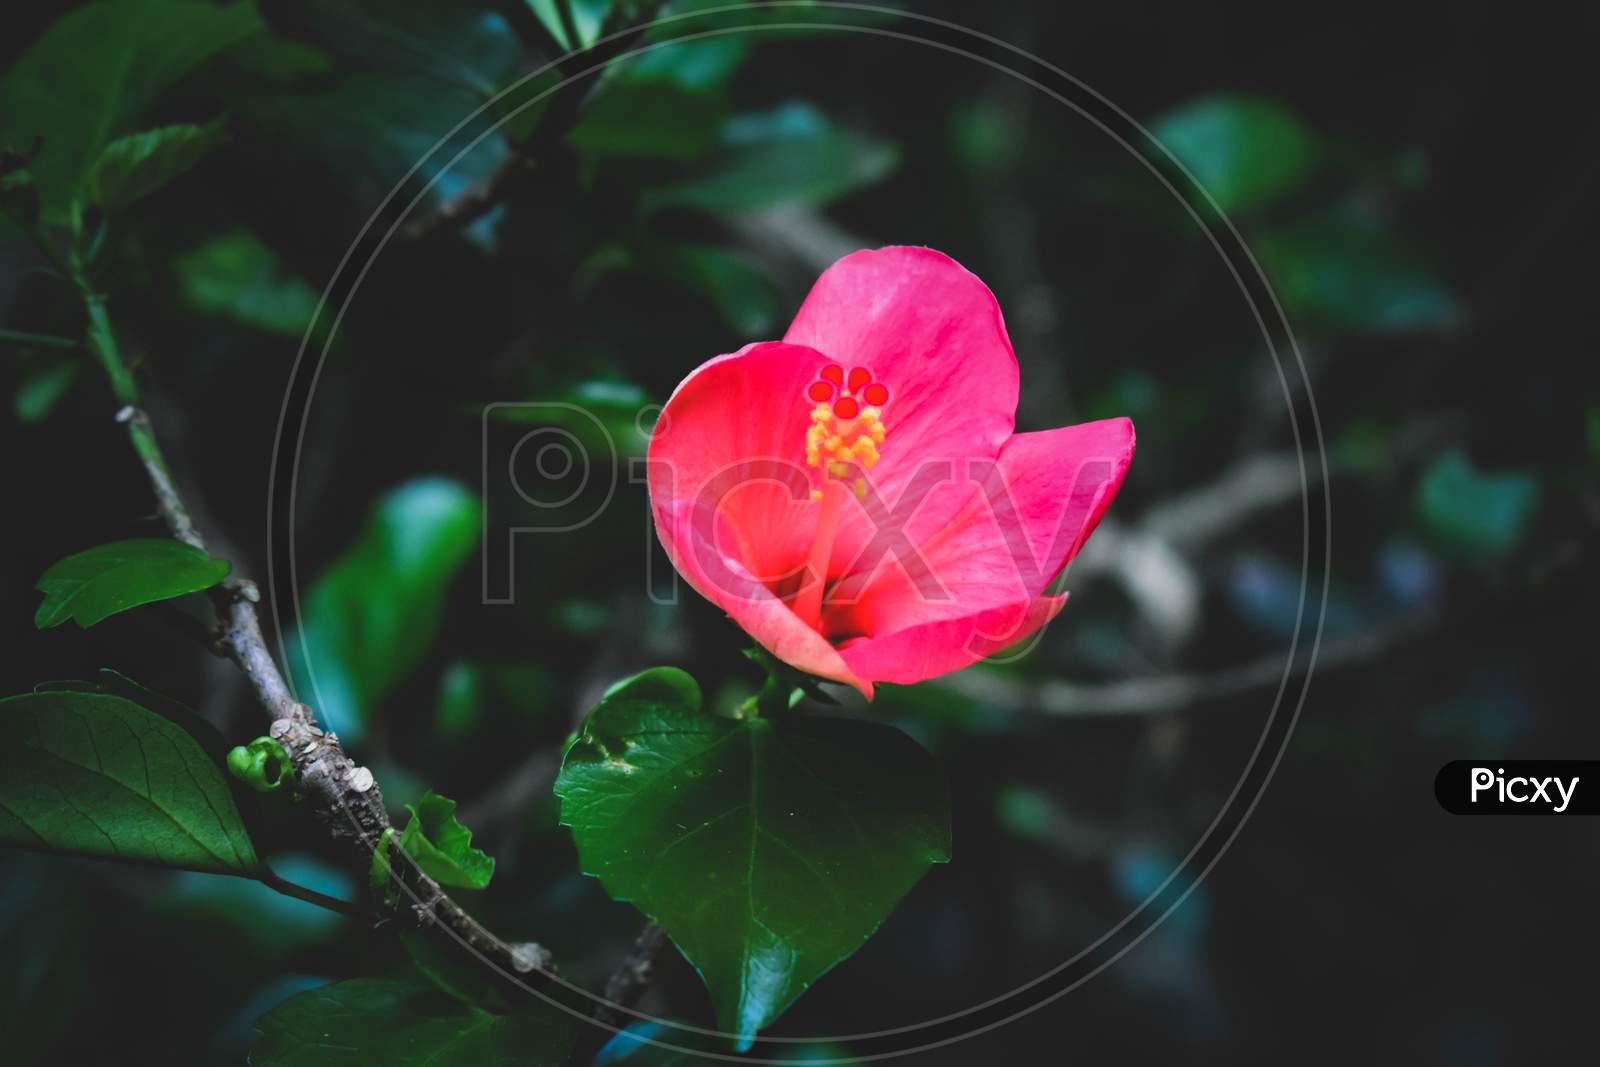 Small Young Hibiscus Flower With Pollen Grains And Green Leaves